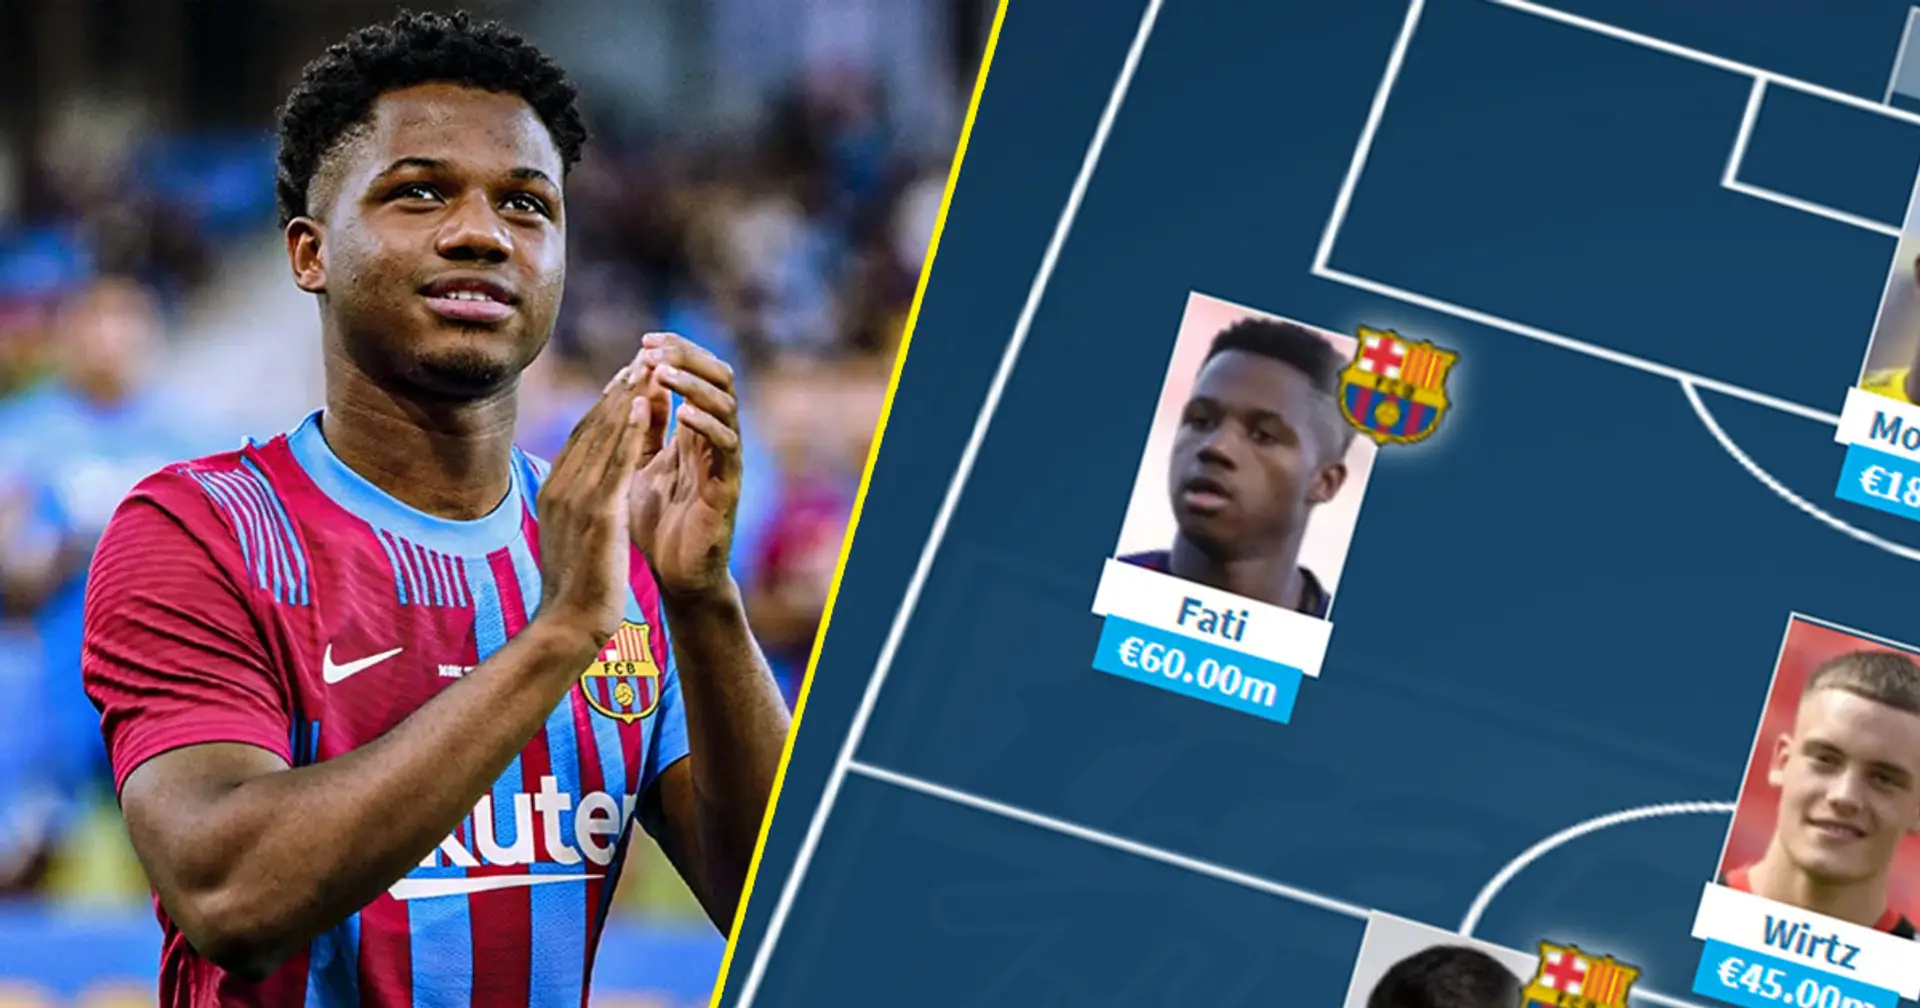 2 Barca gems and 1 Cule from Germany make World's Most Expensive XI of under-18 players